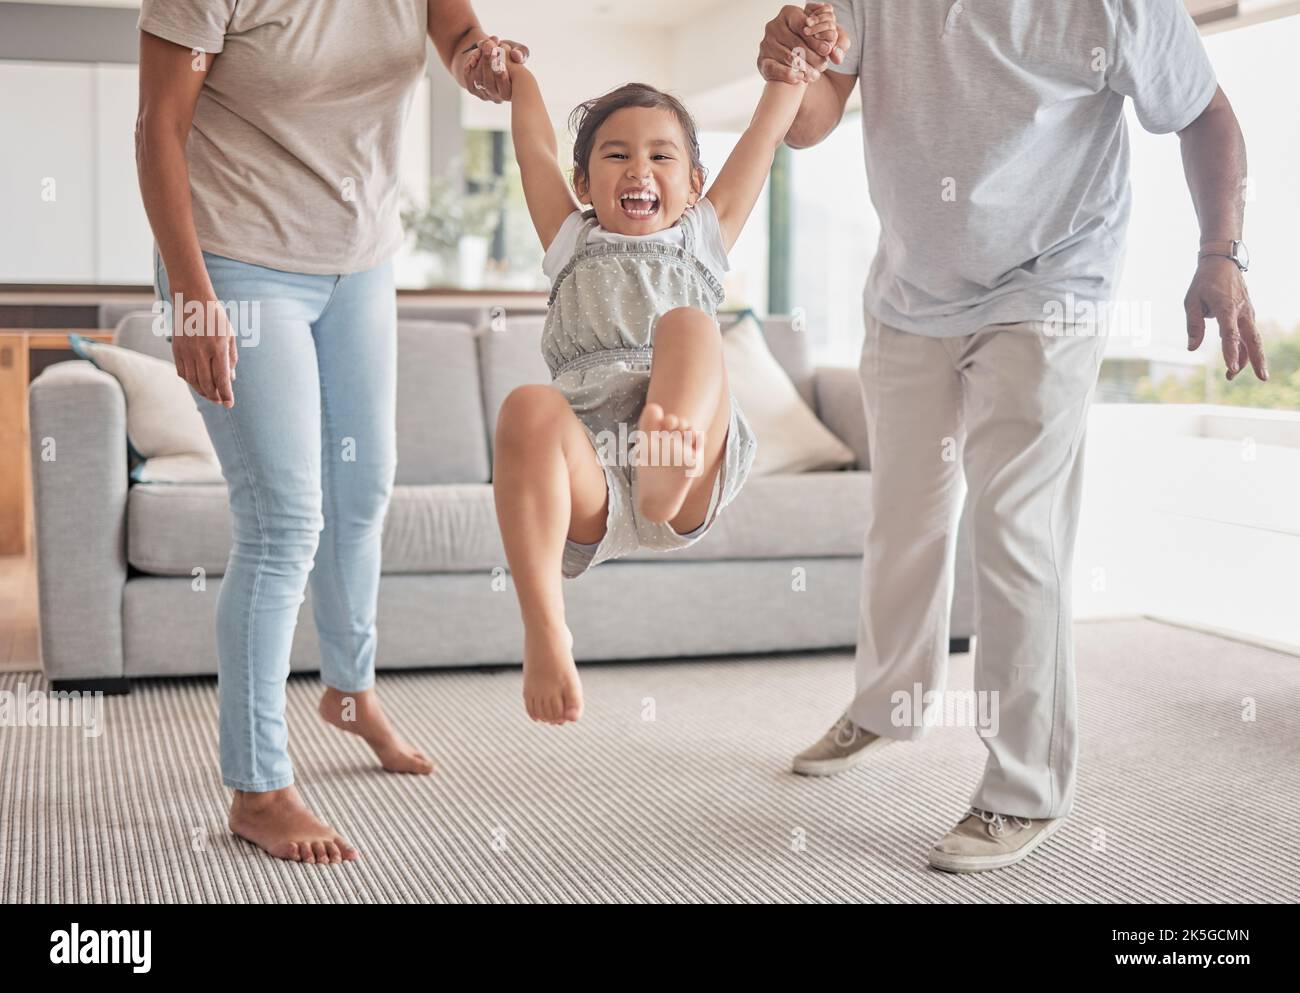 Family, child holding hands and swinging in fun living room play time, childhood and bonding at home. Happy kid smile in playful childcare and joyful Stock Photo